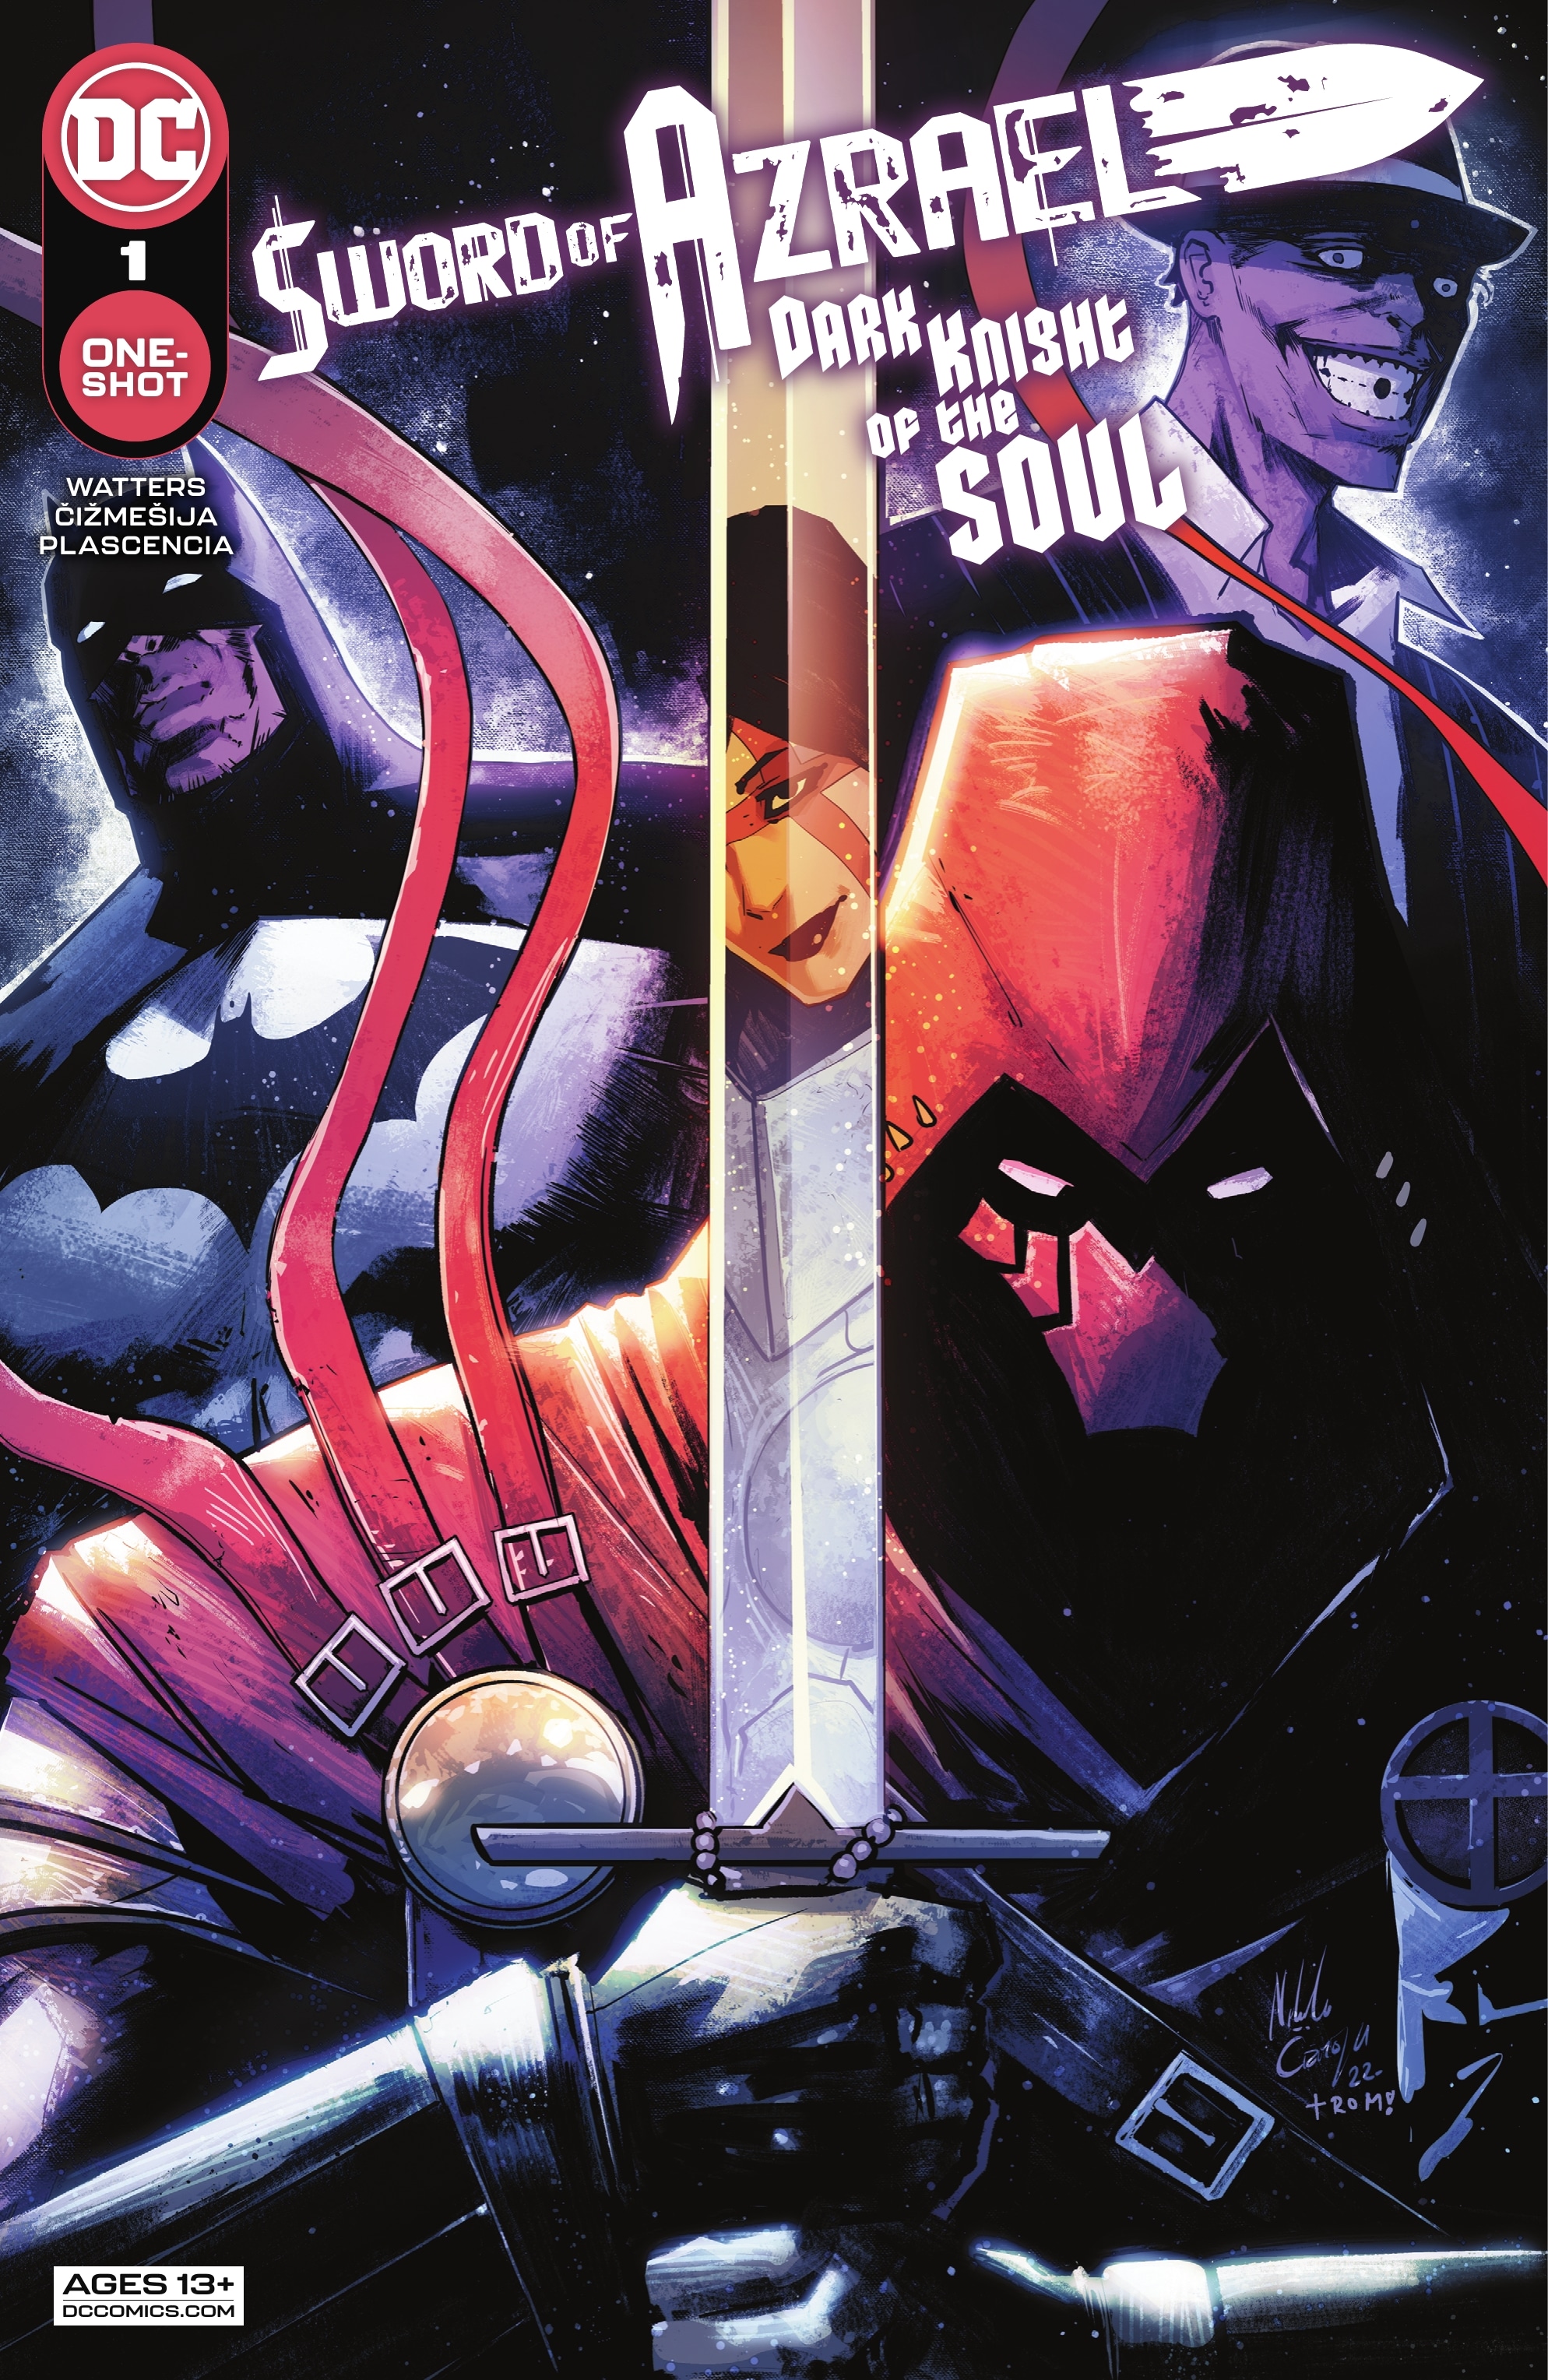 Read online Sword of Azrael: Dark Knight of the Soul comic -  Issue #1 - 1